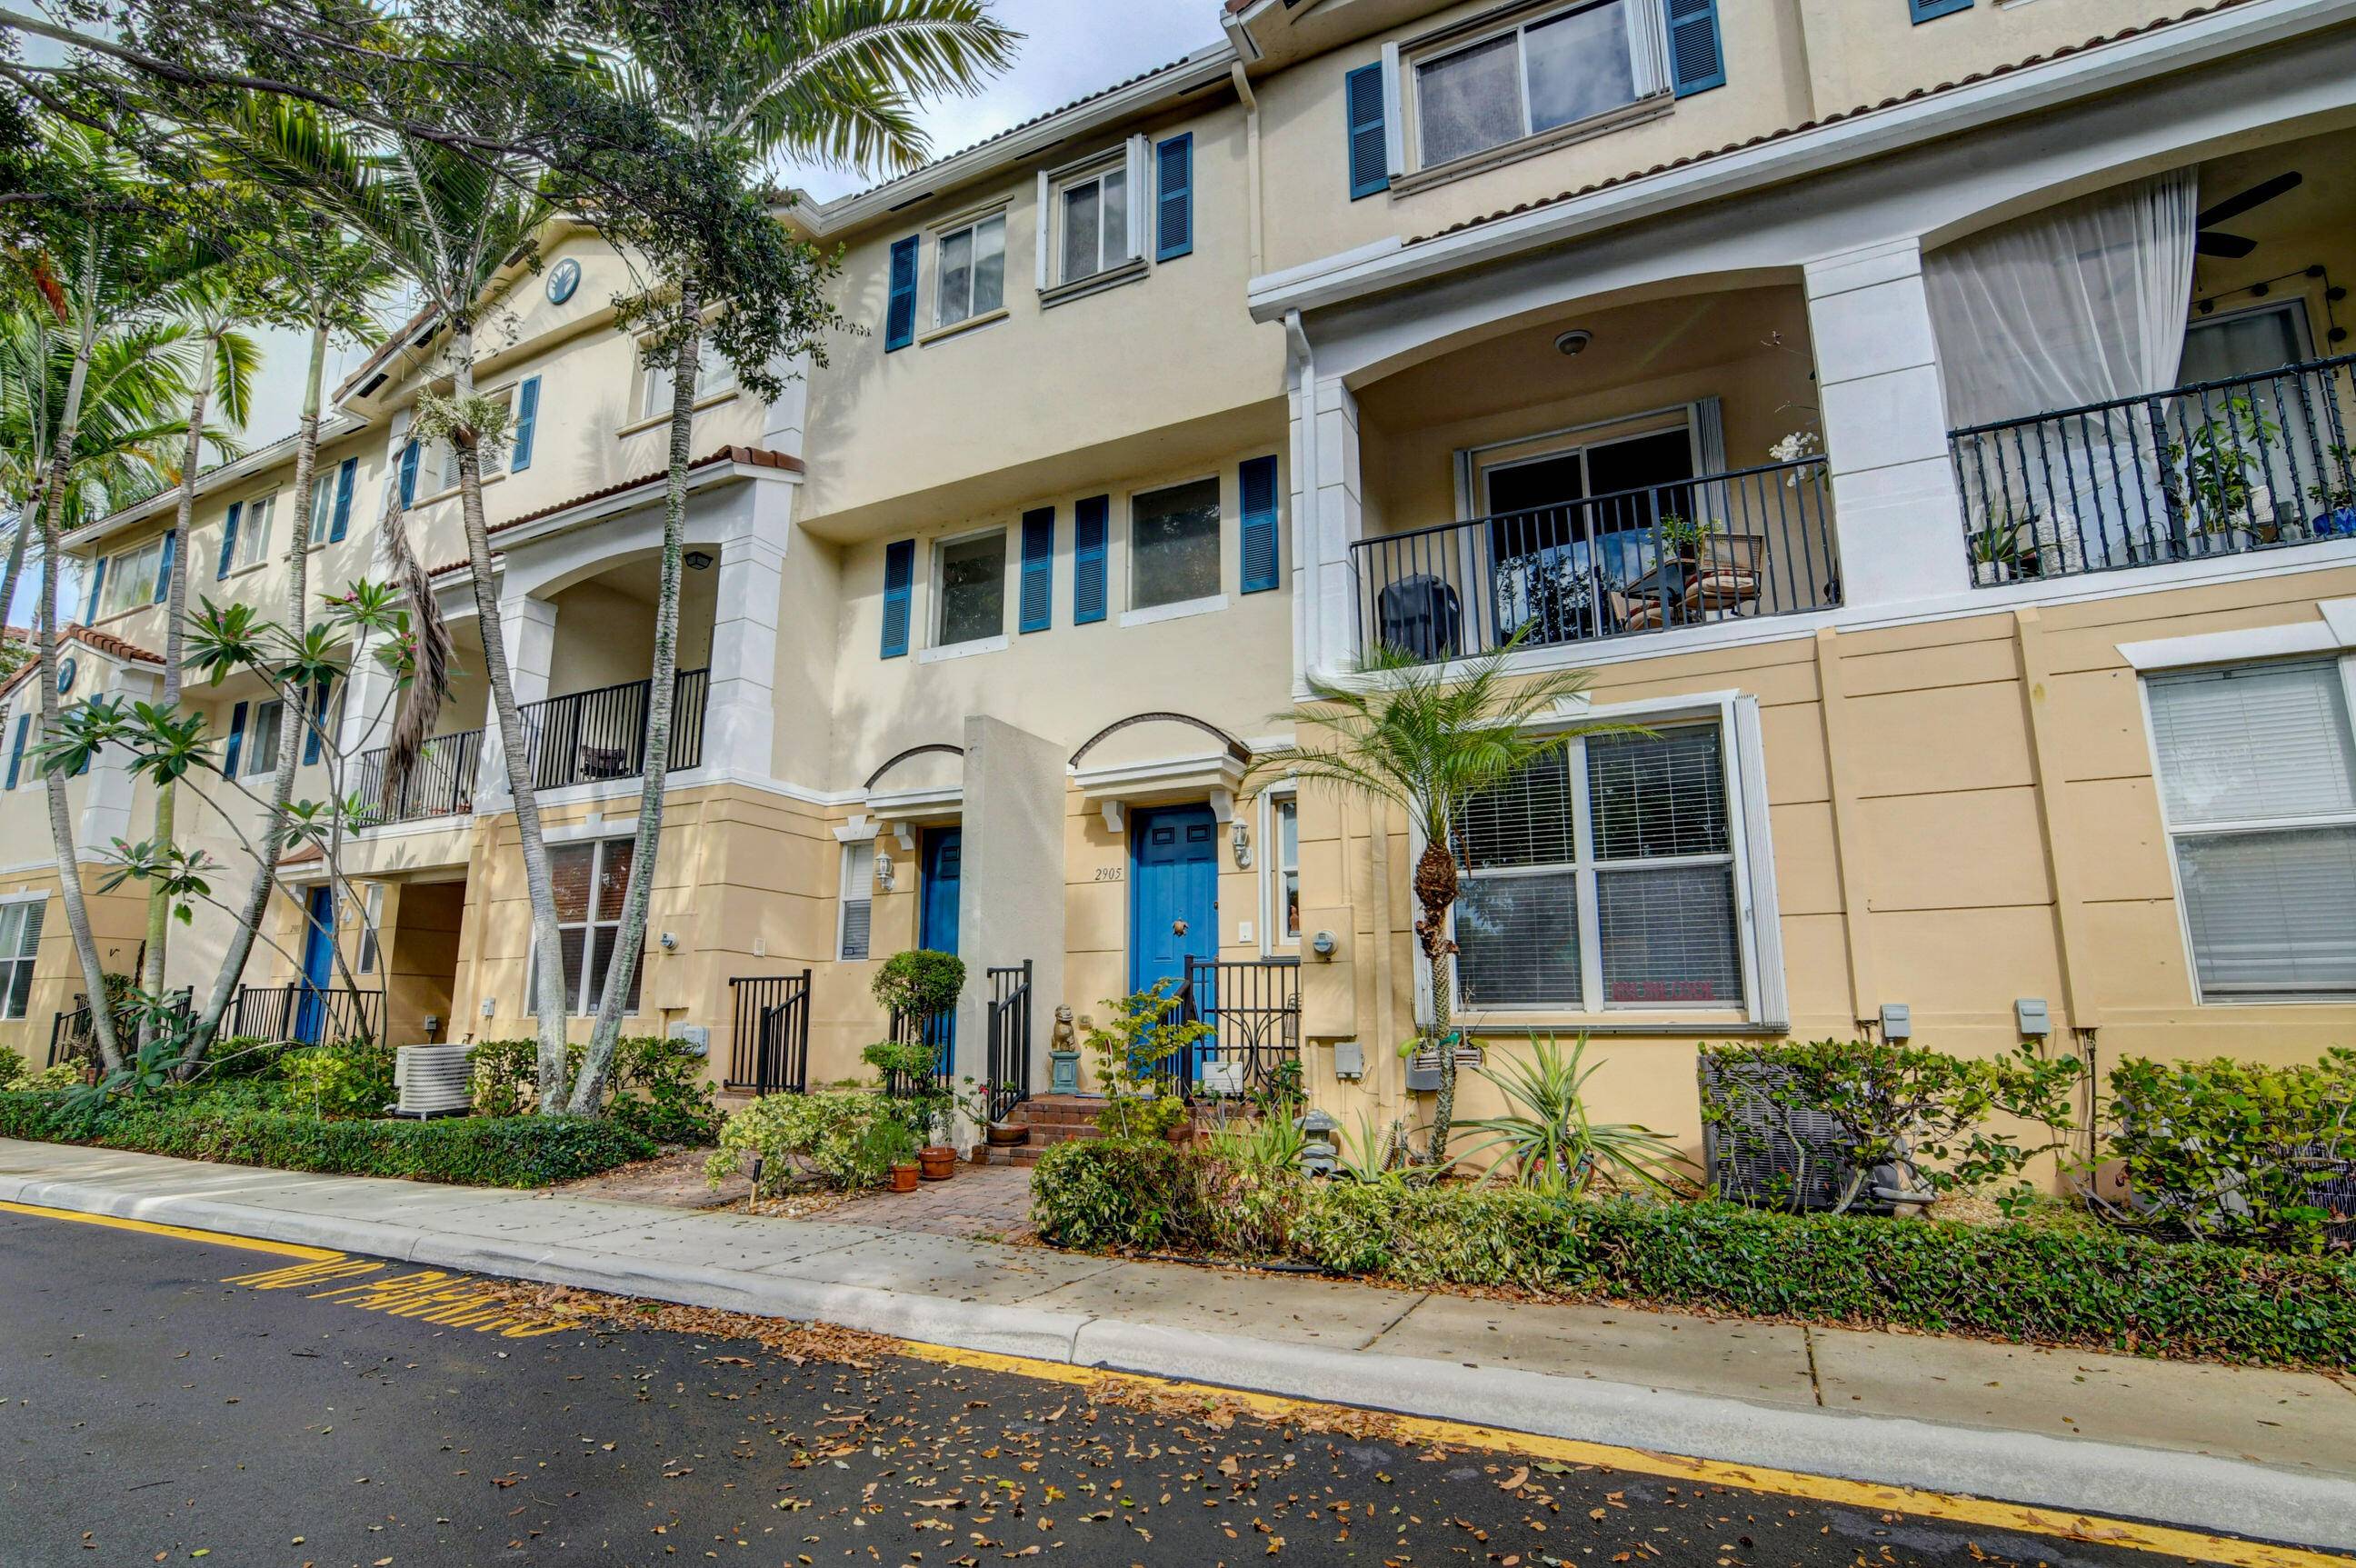 Find more to love in this lakeview townhome located in the desirable Parkside Square community located just minutes from the oceanfront.